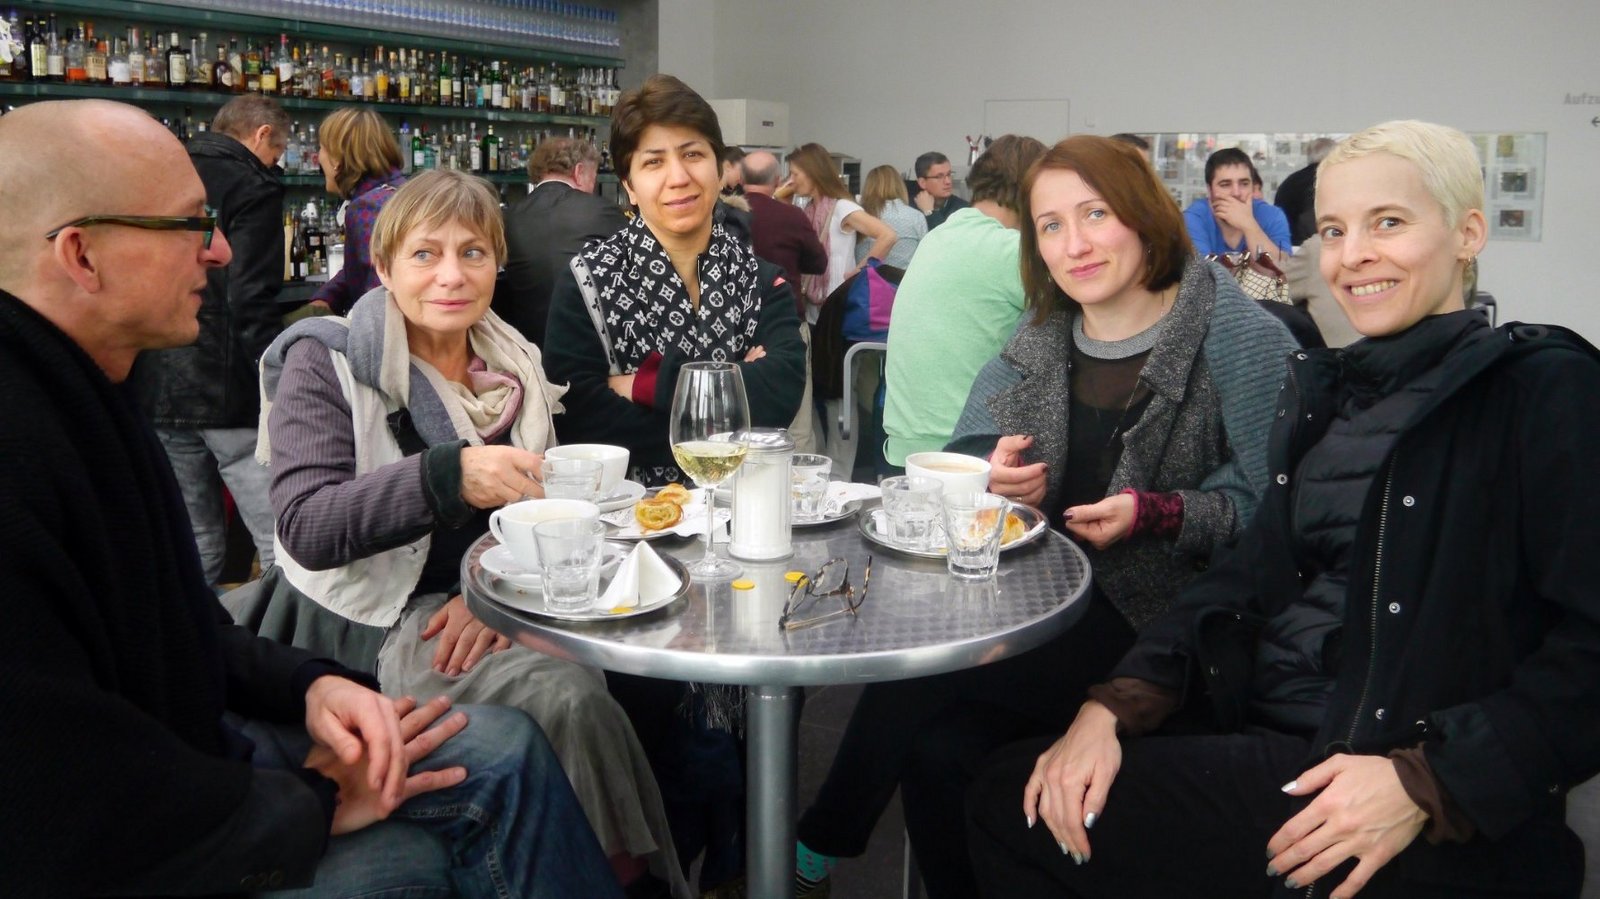 Artist Candice Breitz with Director of New Clients Alexander Koch with New Patrons group sitting in a café in Rostock